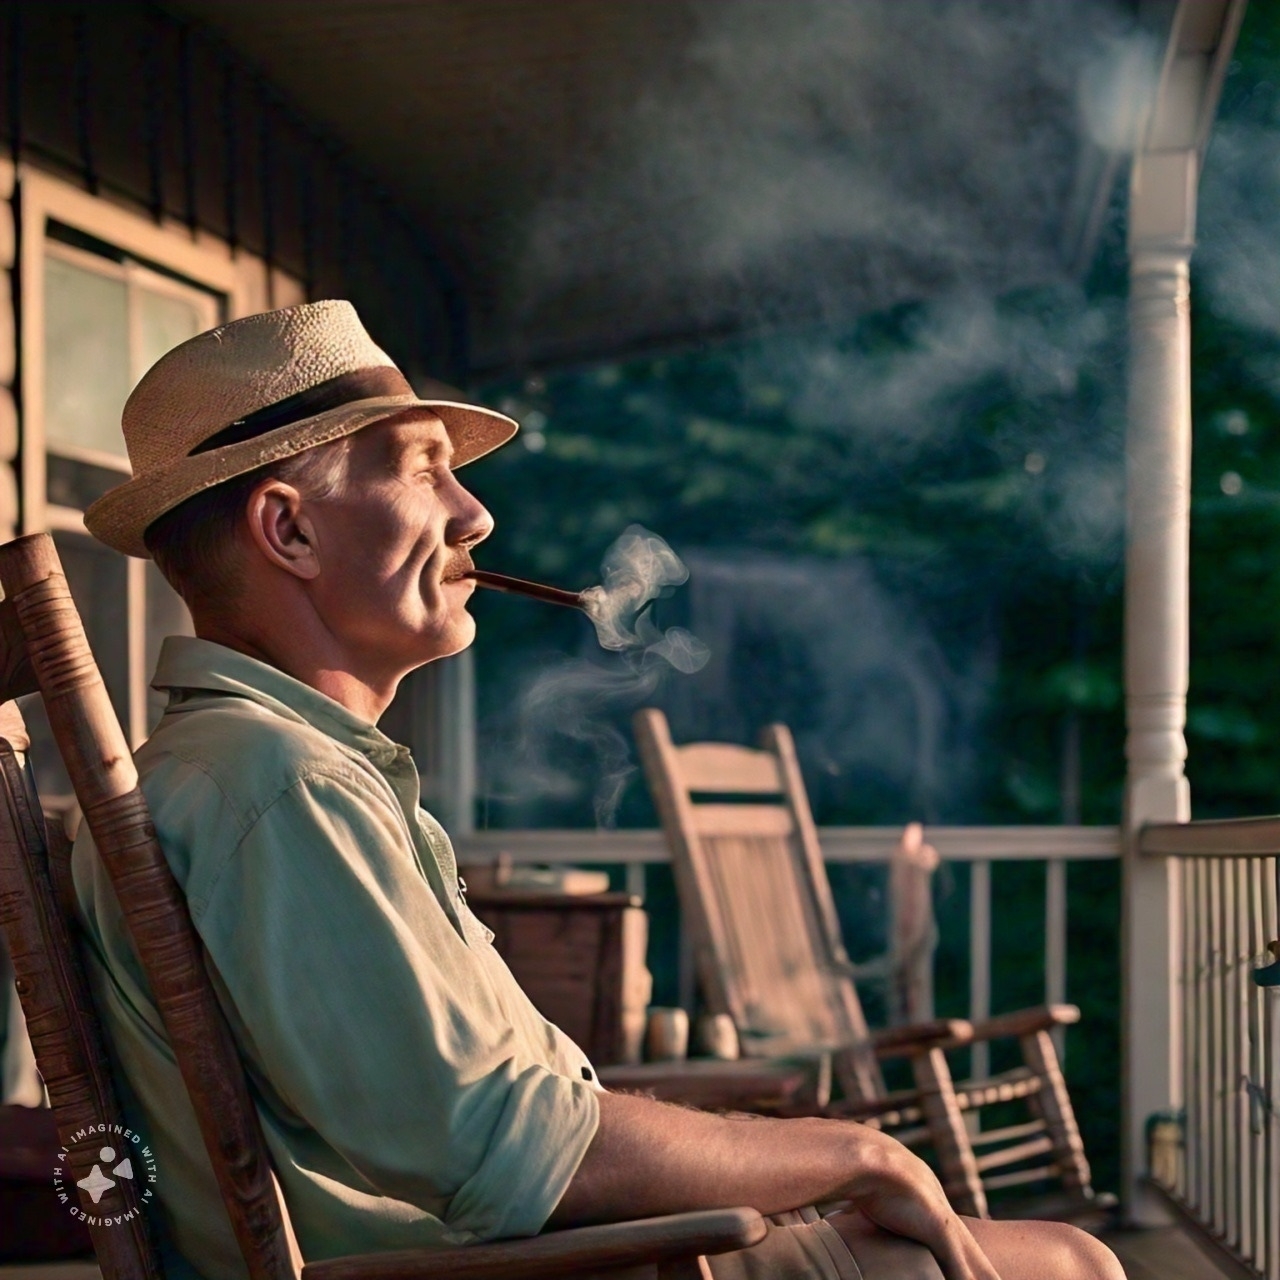 His stubbled face and steel blue eyes revealed a deep knowing. His hands were calloused. The #smoke from his pipe drifted gently off against the setting sun. The only sound was the creak from the loose deck board beneath his rocking chair. 